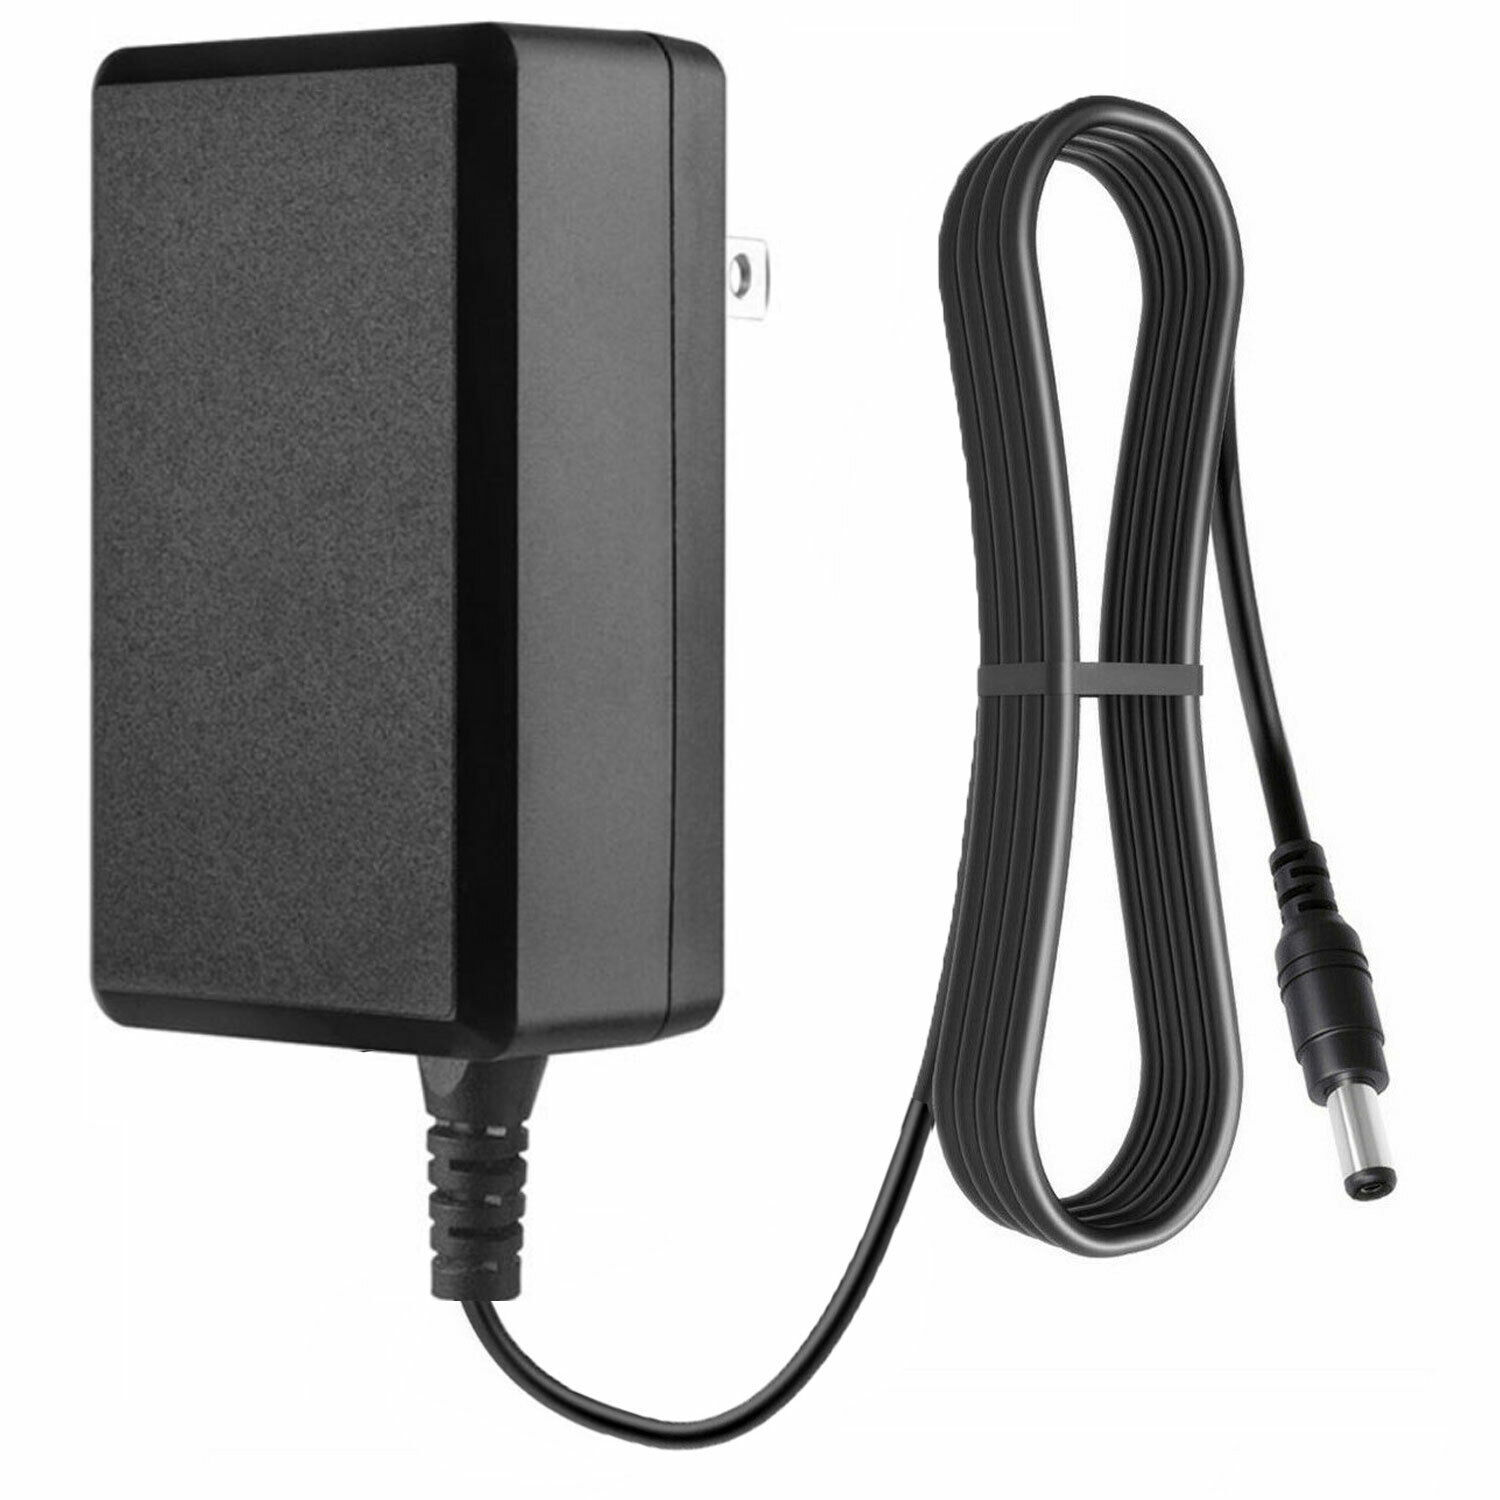 *Brand NEW* BLC241200500MZ 5.5mm Universal 12V 500mA AC/DC Adapter Power Supply Charger